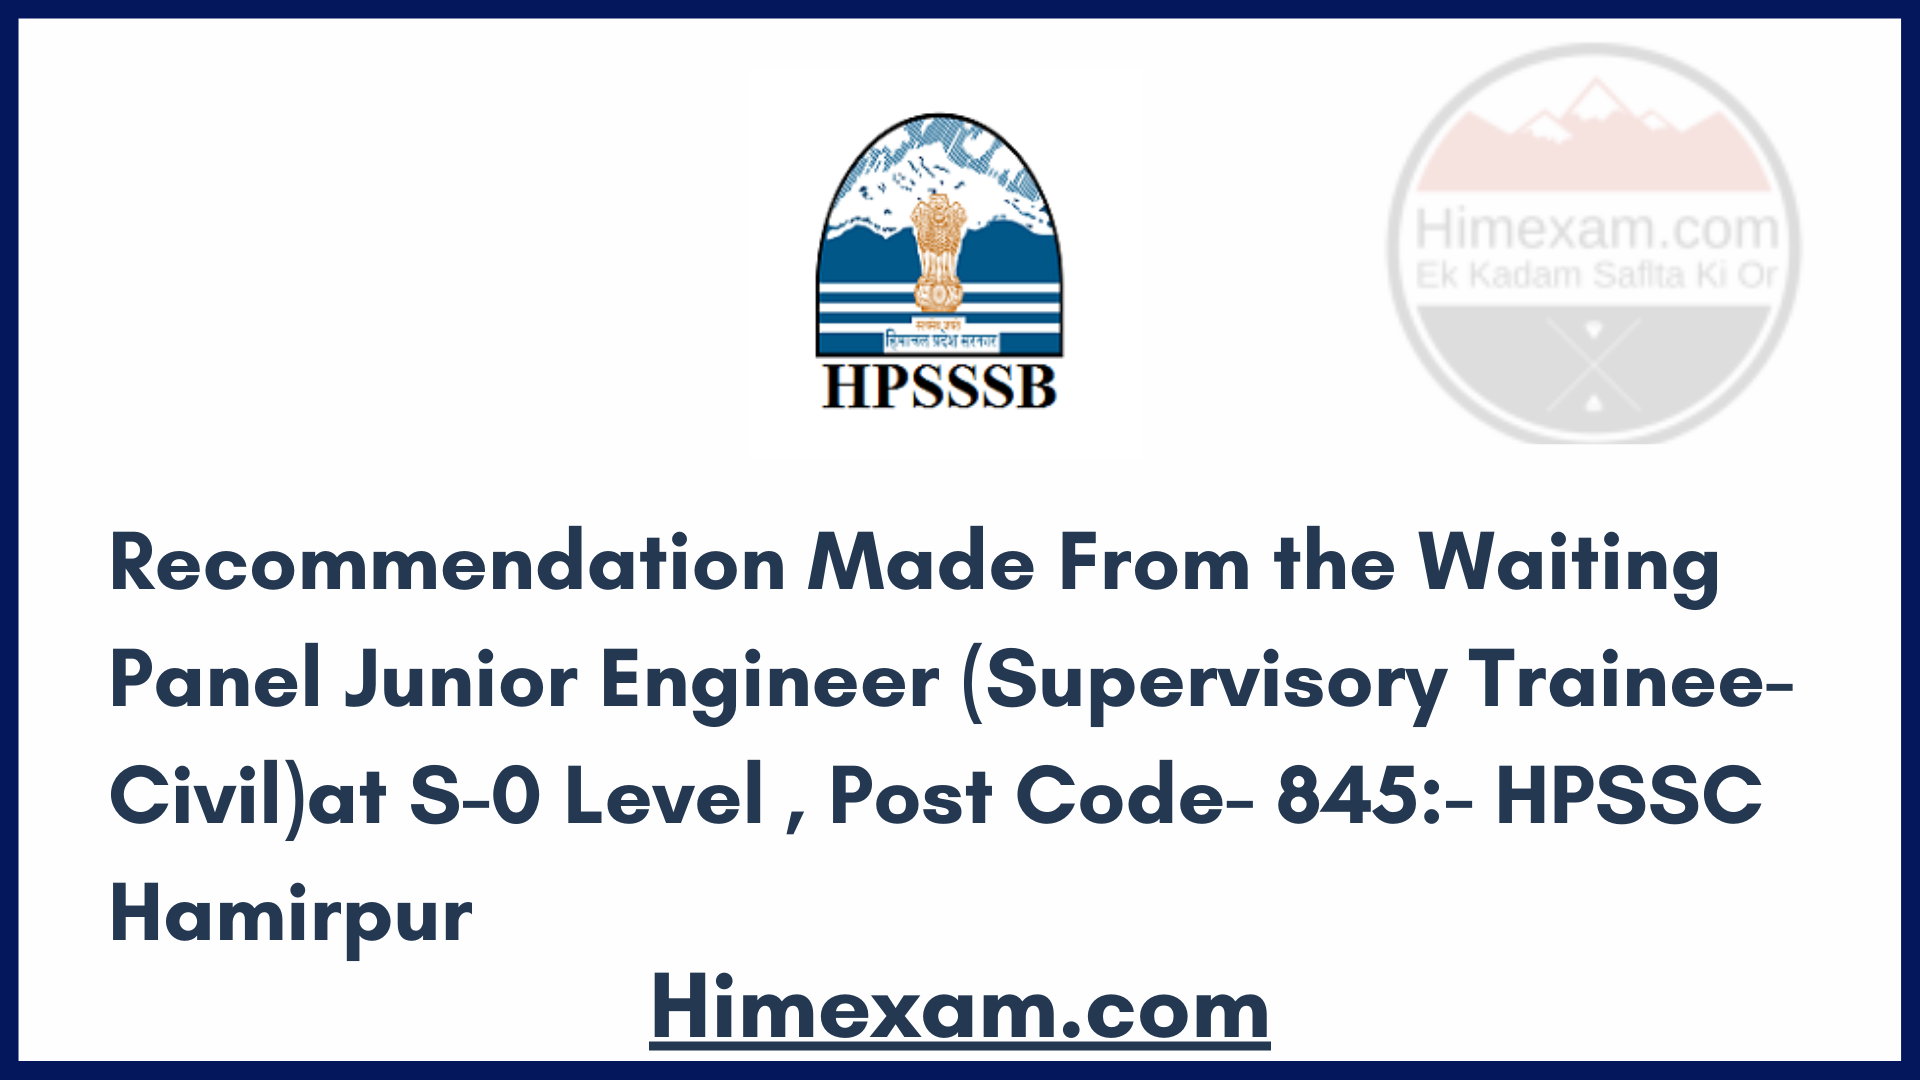 Recommendation Made From the Waiting Panel Junior Engineer (Supervisory Trainee-Civil)at S-0 Level , Post Code- 845:- HPSSC Hamirpur